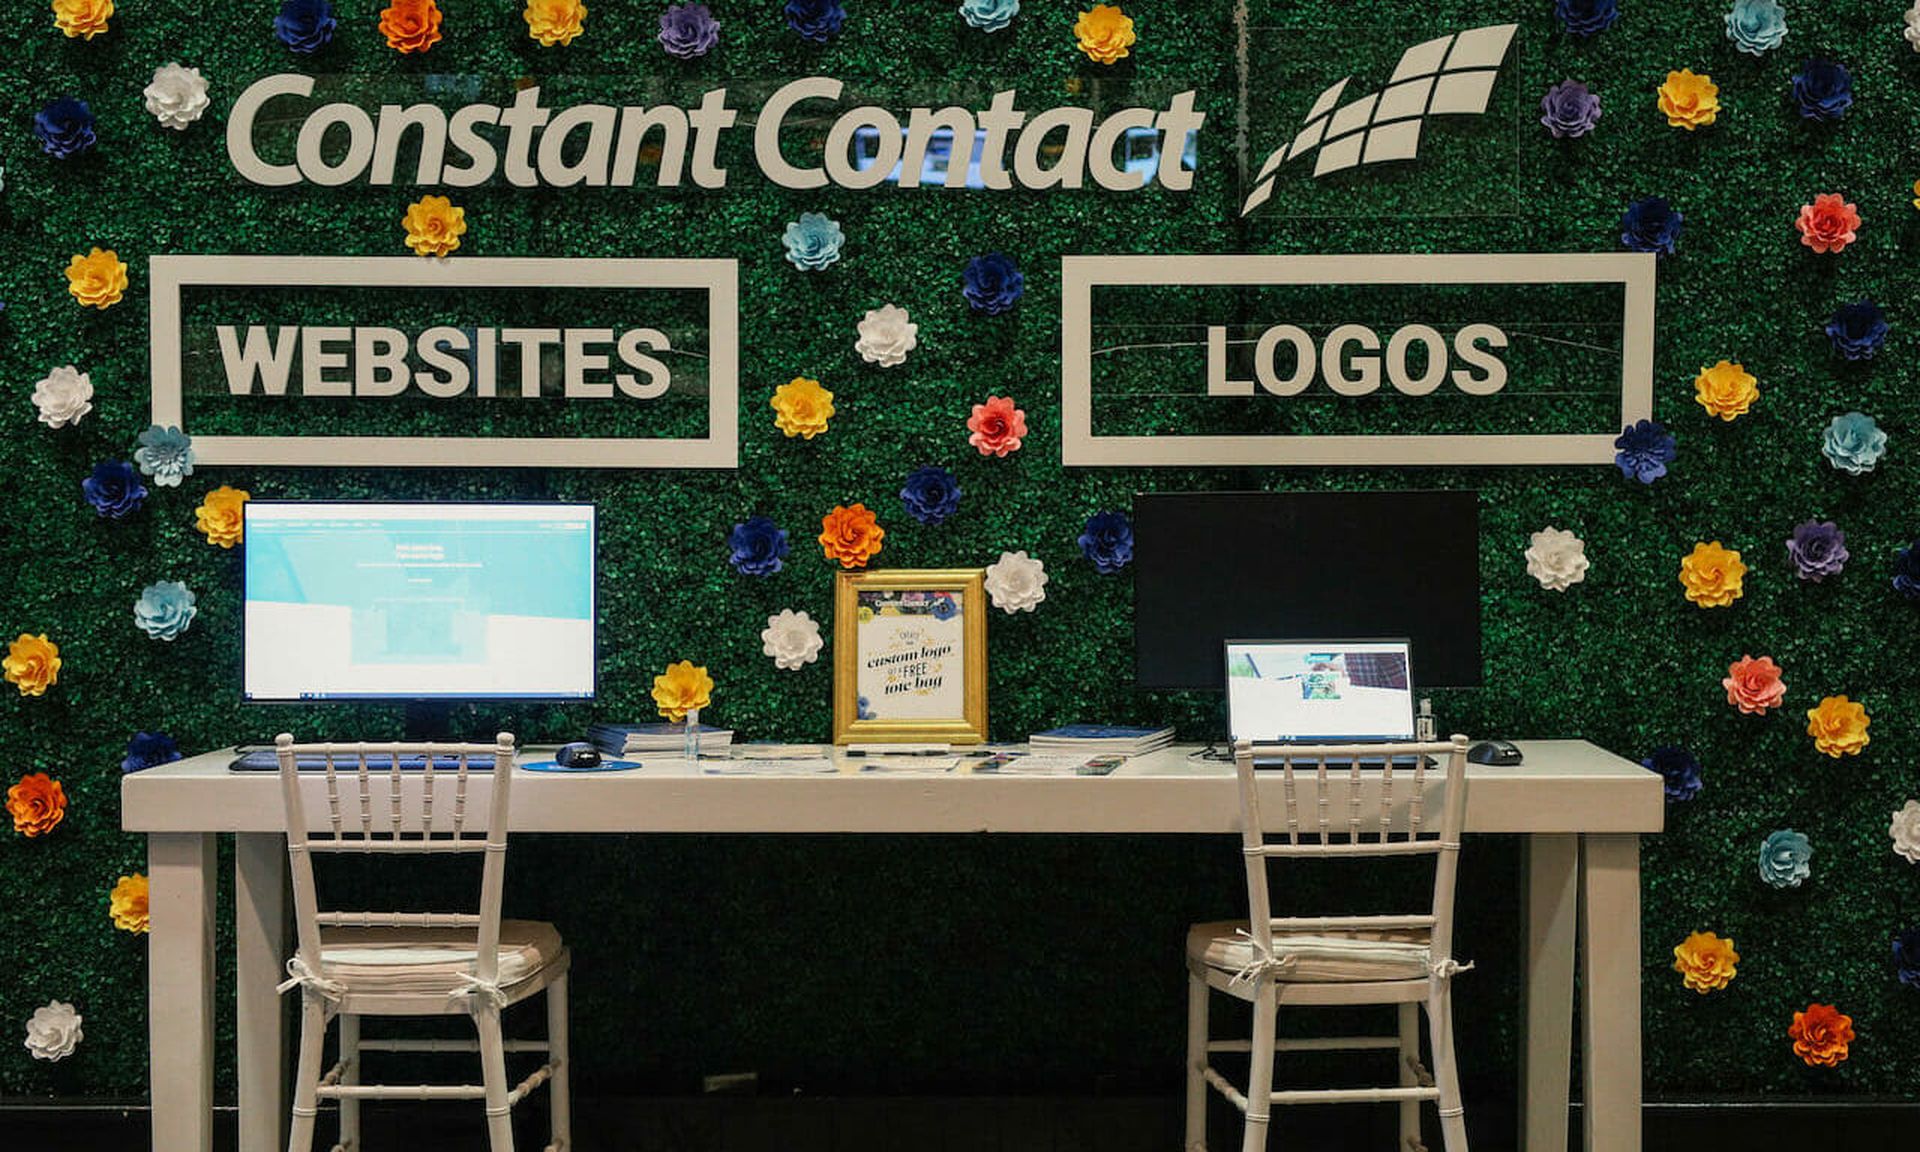 (A Constant Contact booth display at the eAltitude Summit is licensed under CC BY-NC 2.0)